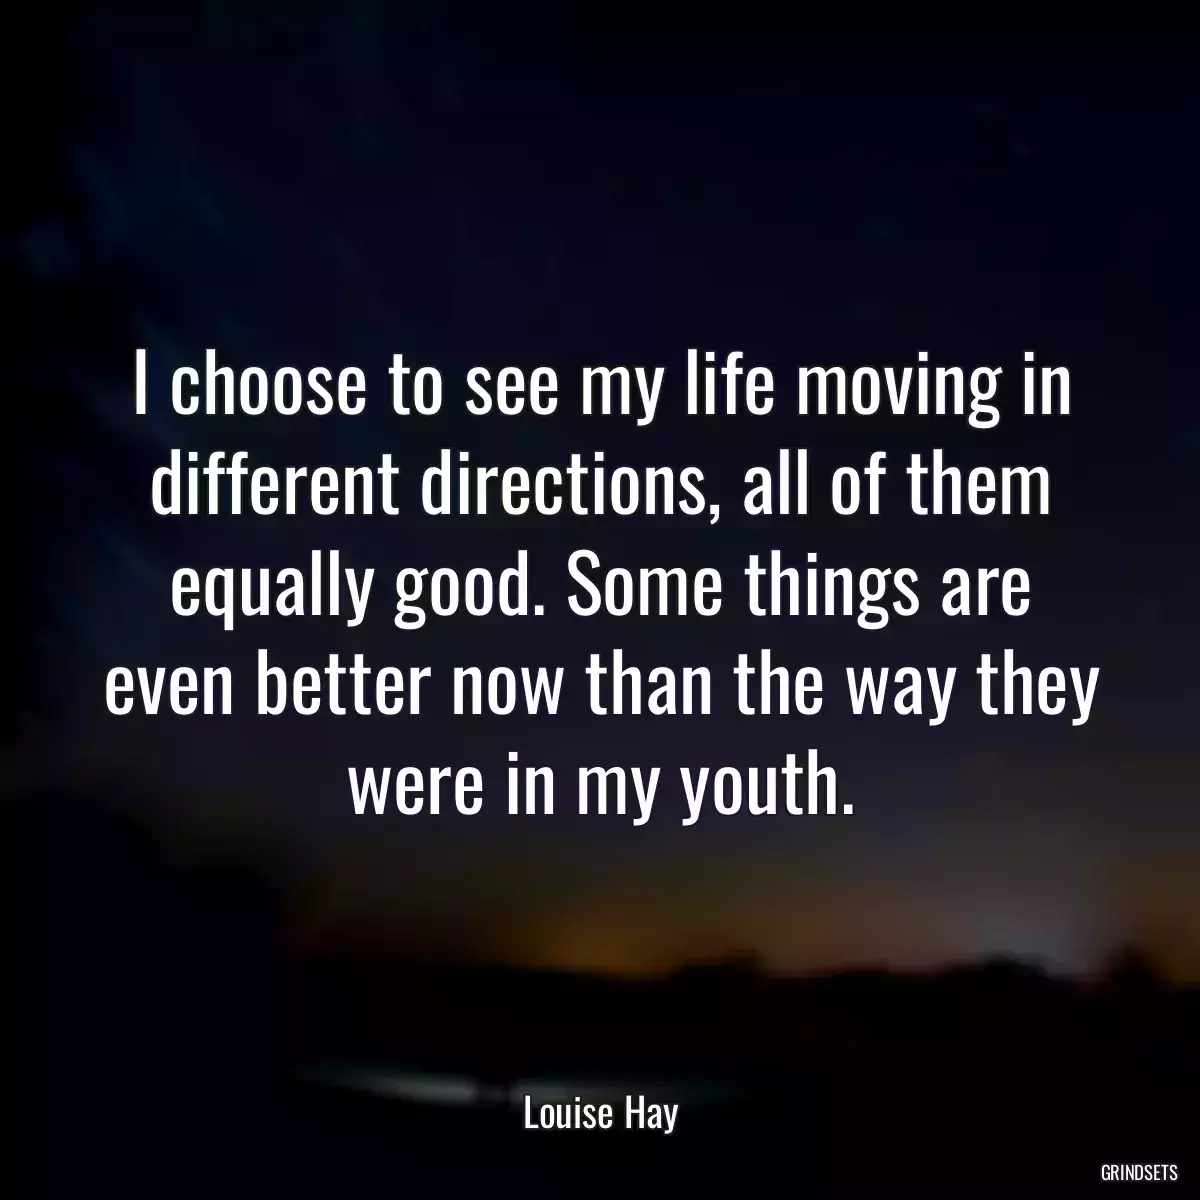 I choose to see my life moving in different directions, all of them equally good. Some things are even better now than the way they were in my youth.